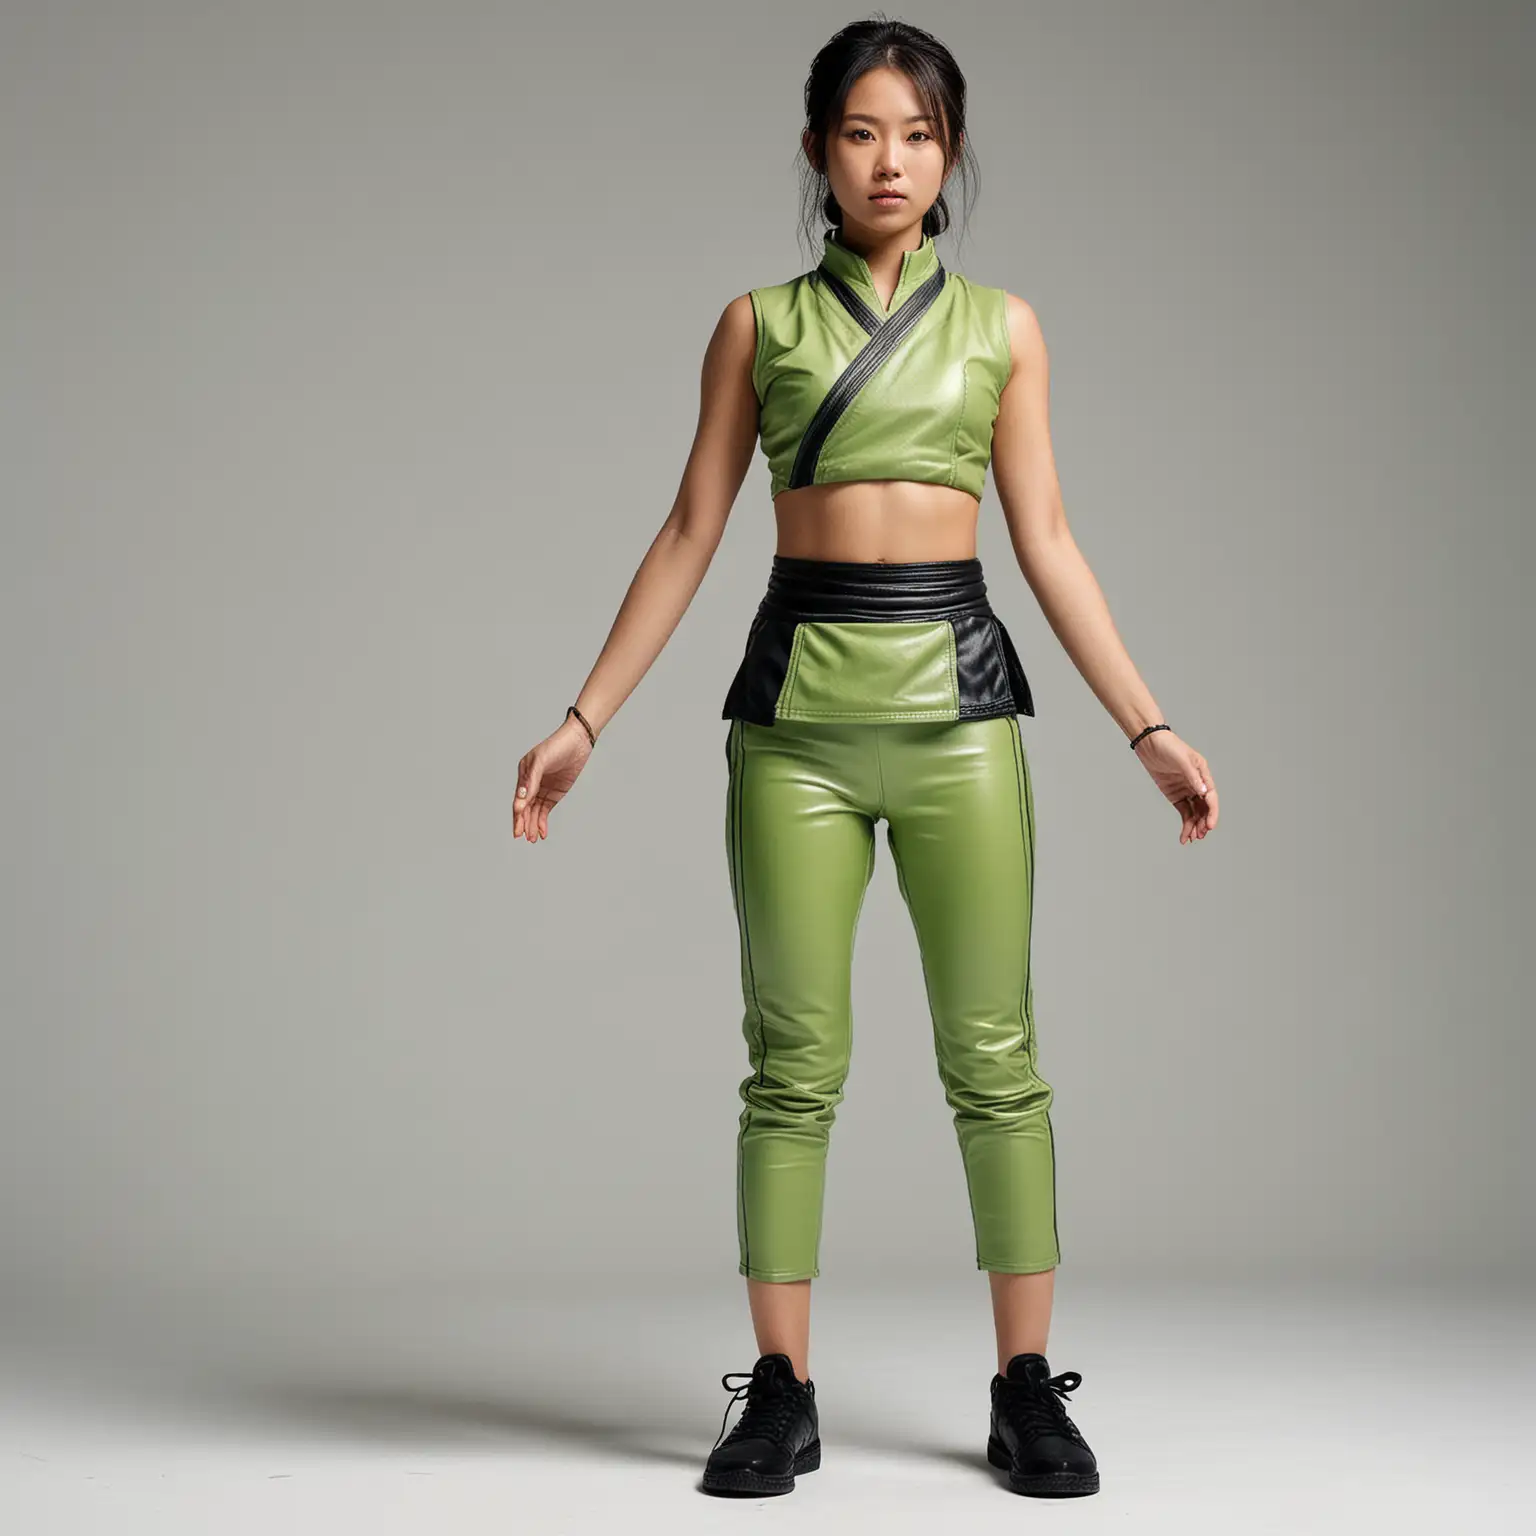 Standing full body view, toned beautiful Japanese supermodel in sleeveless, leather lime-green croptop karate gi with black accents, high-waisted tight black  leggings, black sneakers, sneakers, white background